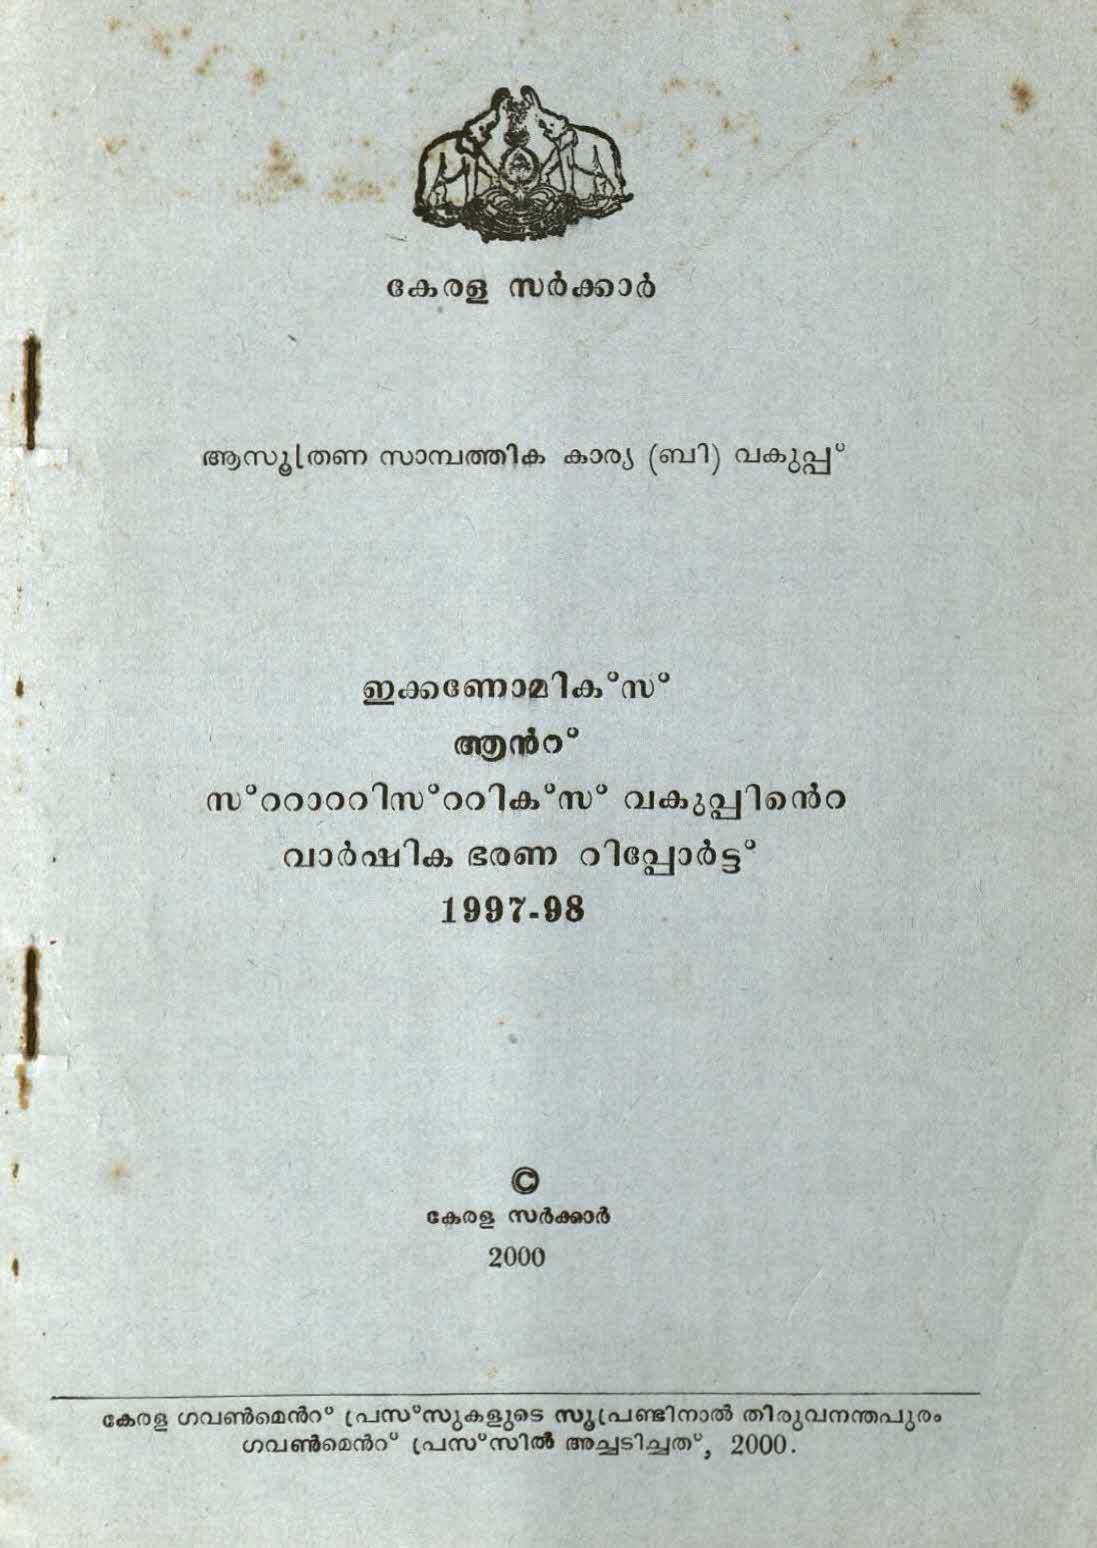 Administration Report 1997-98